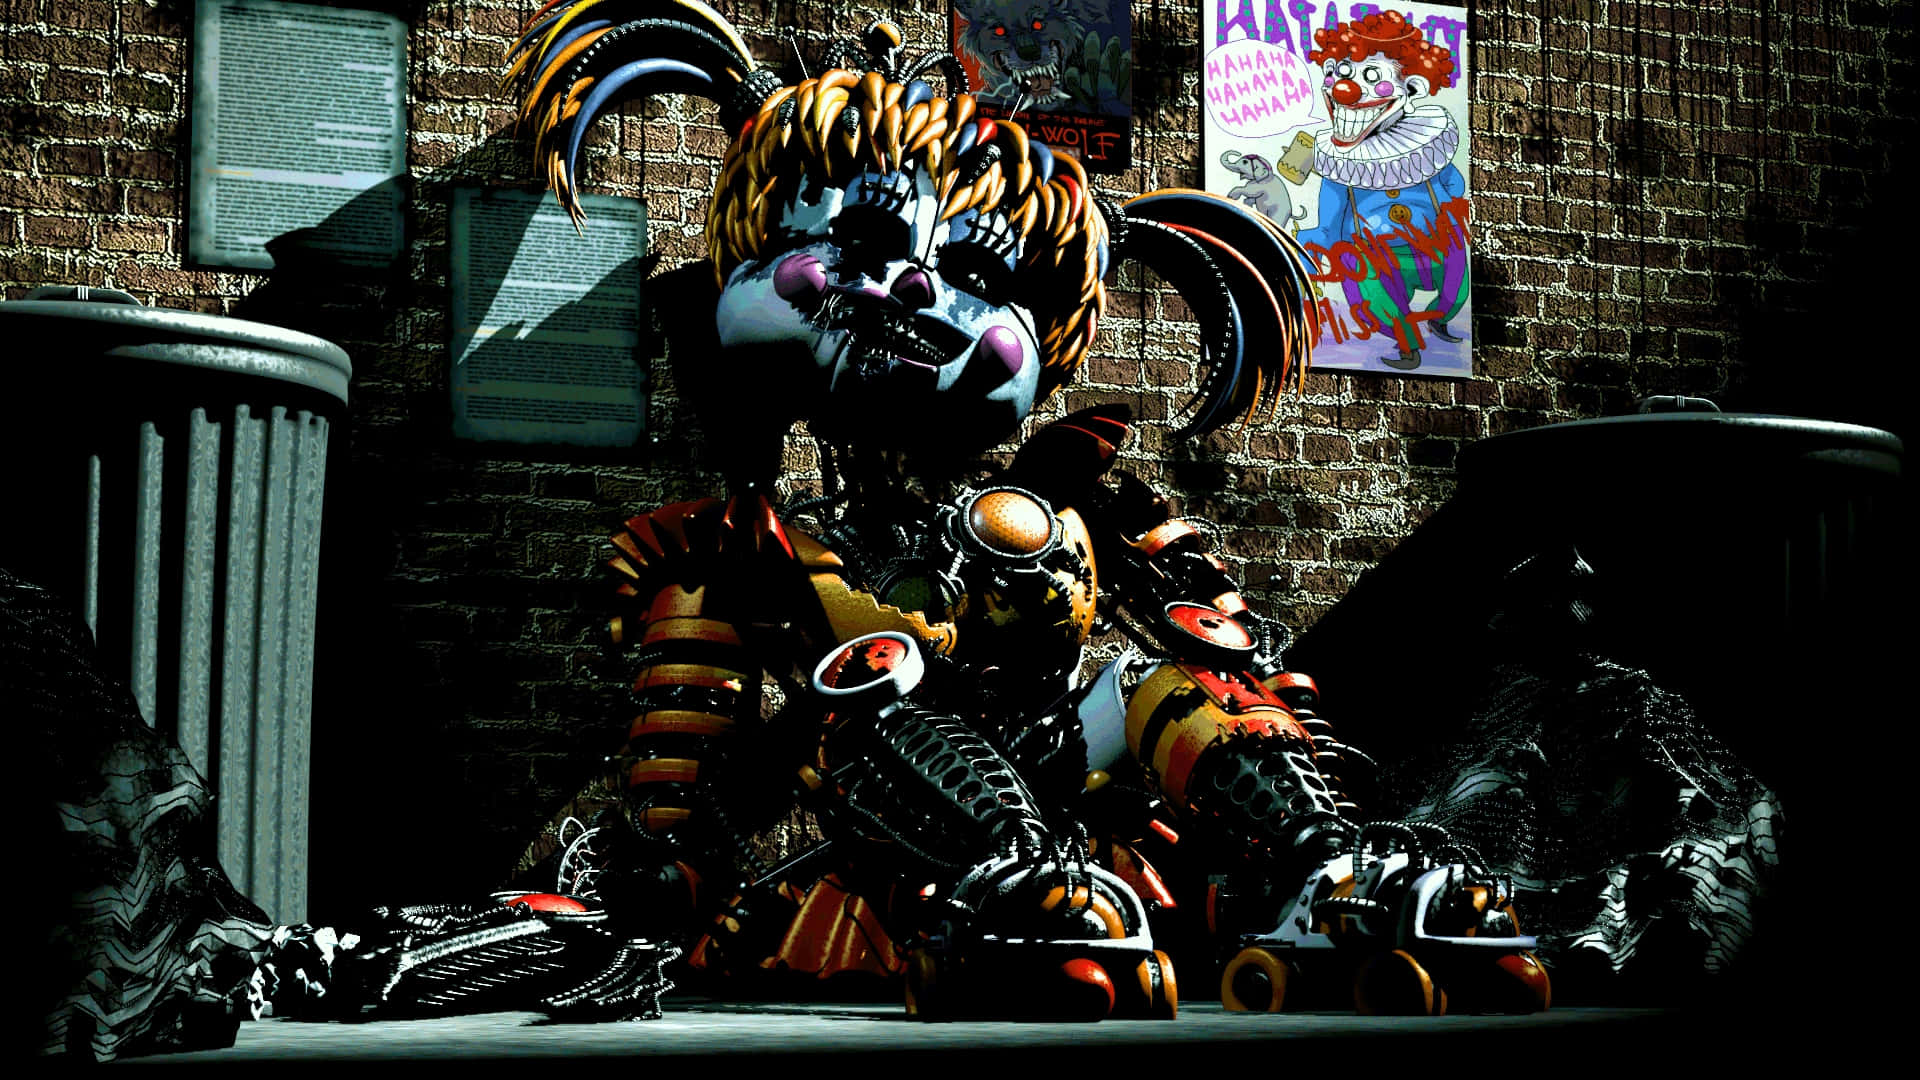 The Creepy, Intriguing World of Scrap Baby Wallpaper